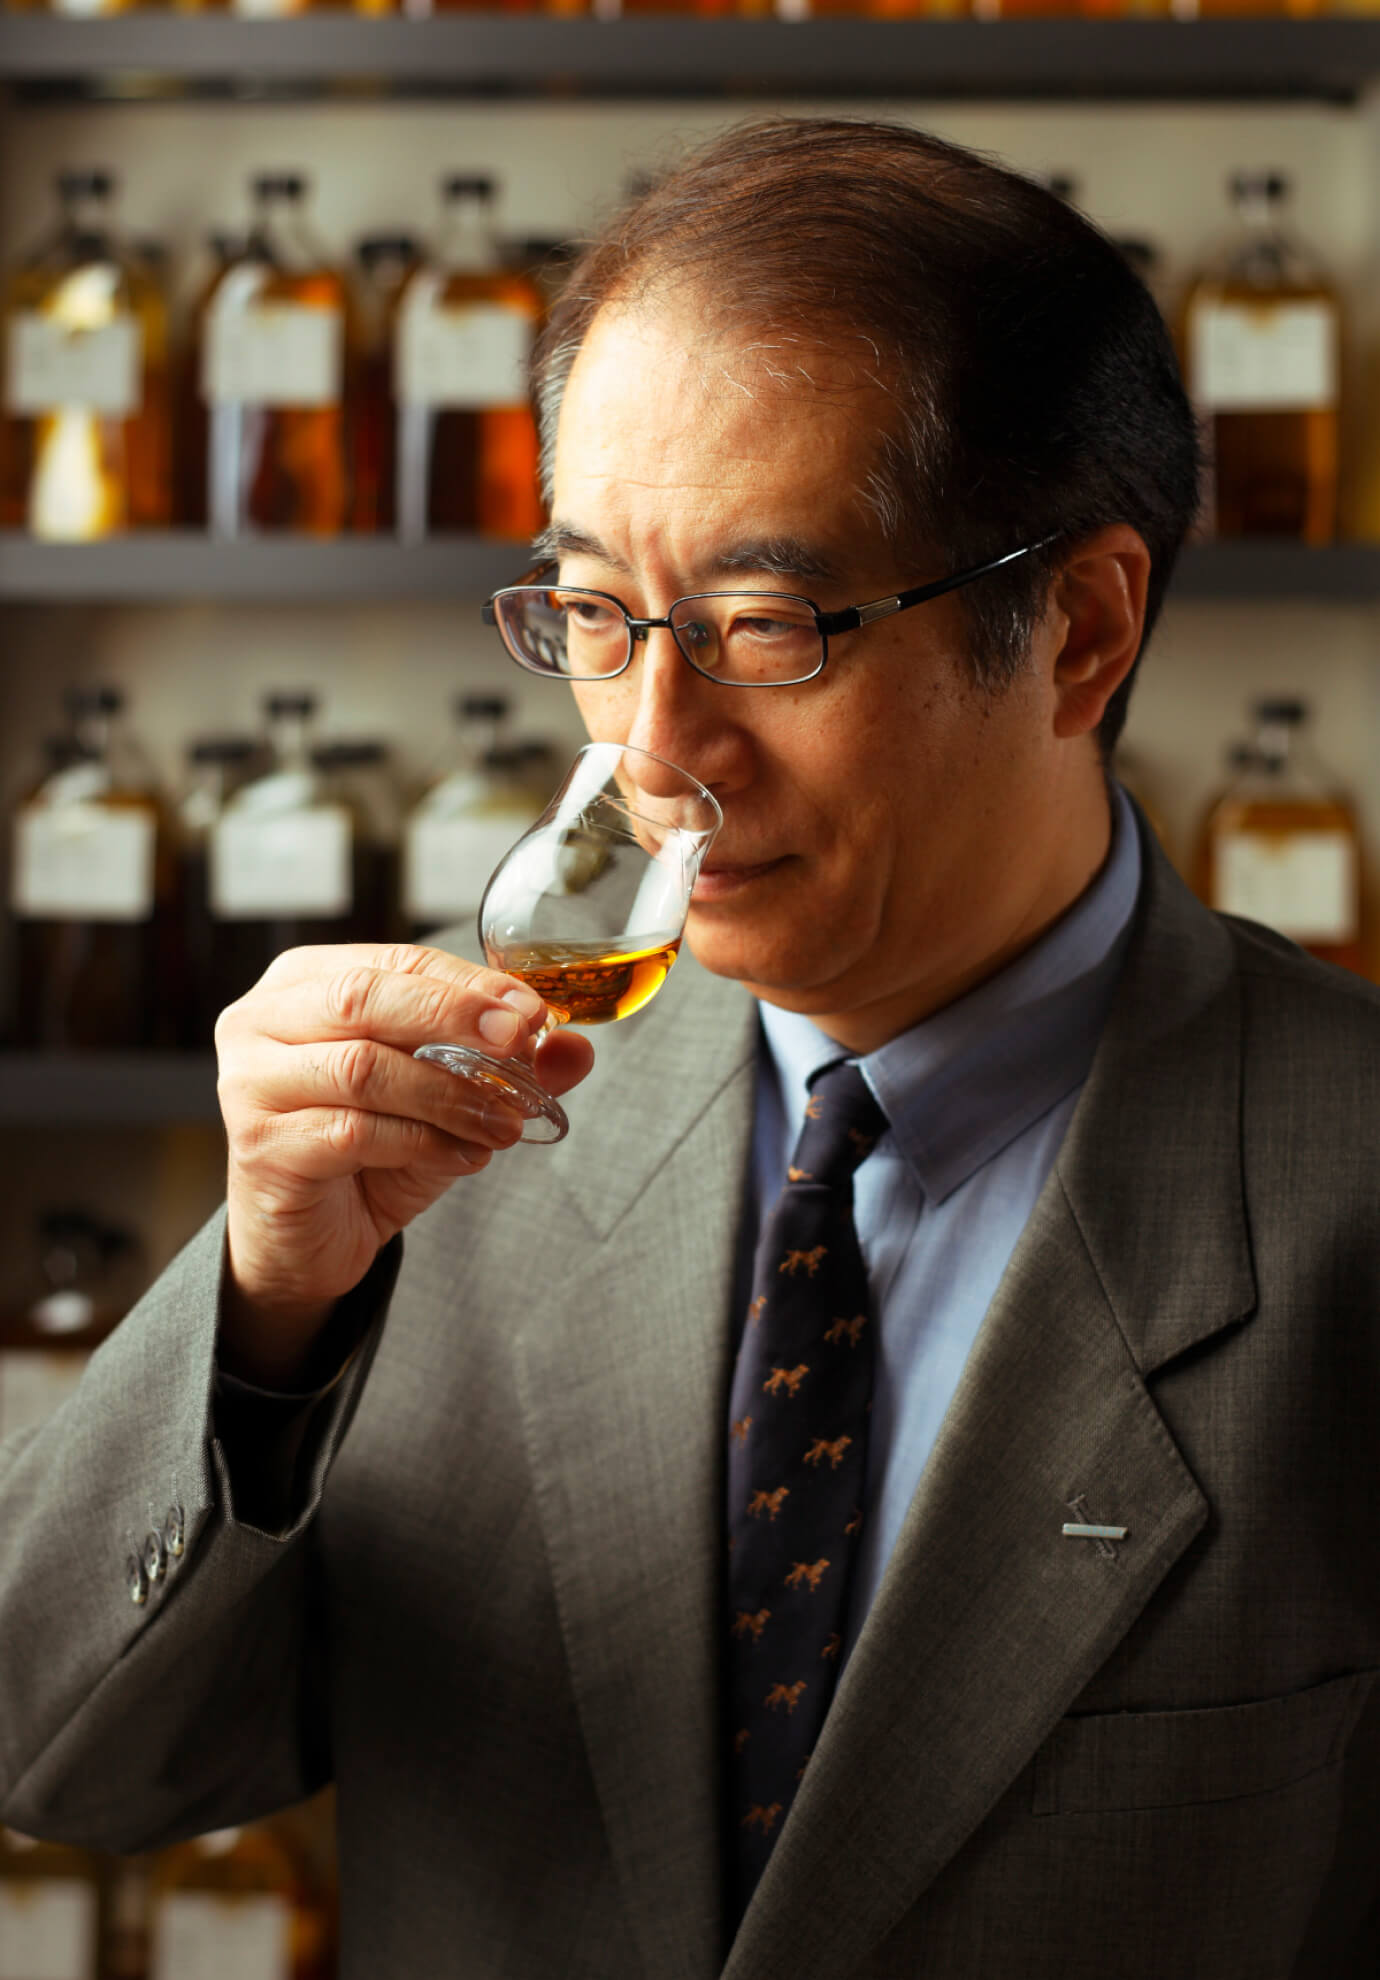 Photo of Suntory vice chairman of the board Shingo Torii sniffing a sample of Suntory product in a bottle room